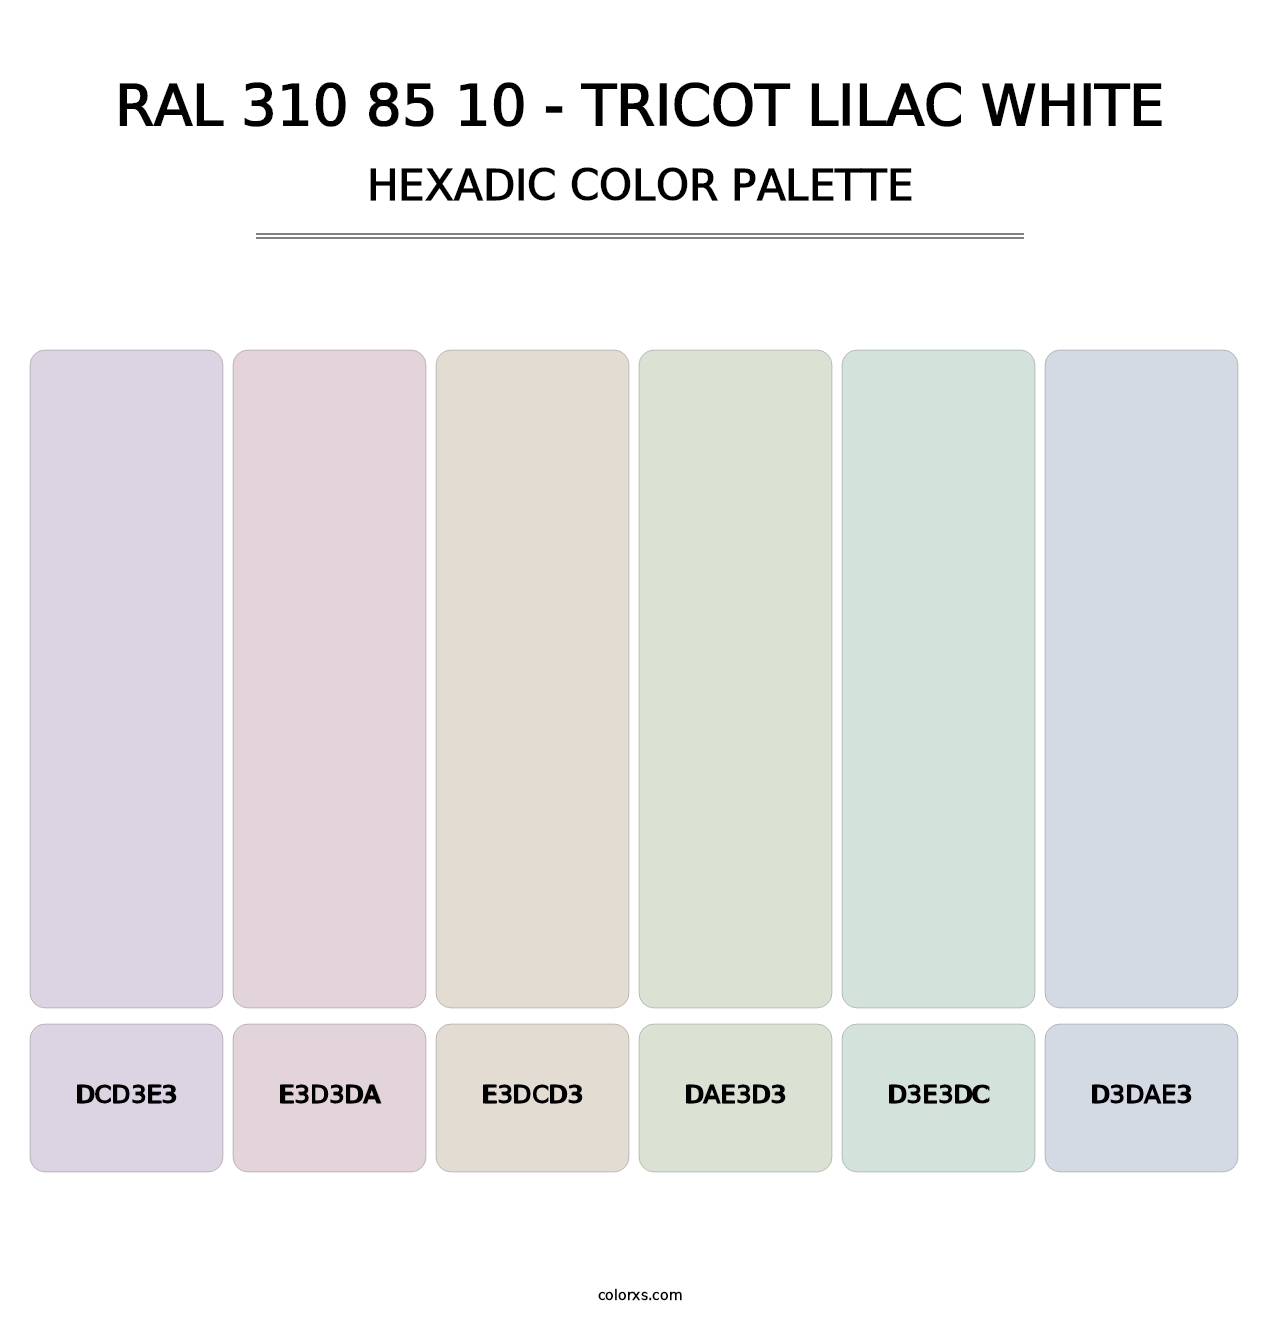 RAL 310 85 10 - Tricot Lilac White - Hexadic Color Palette